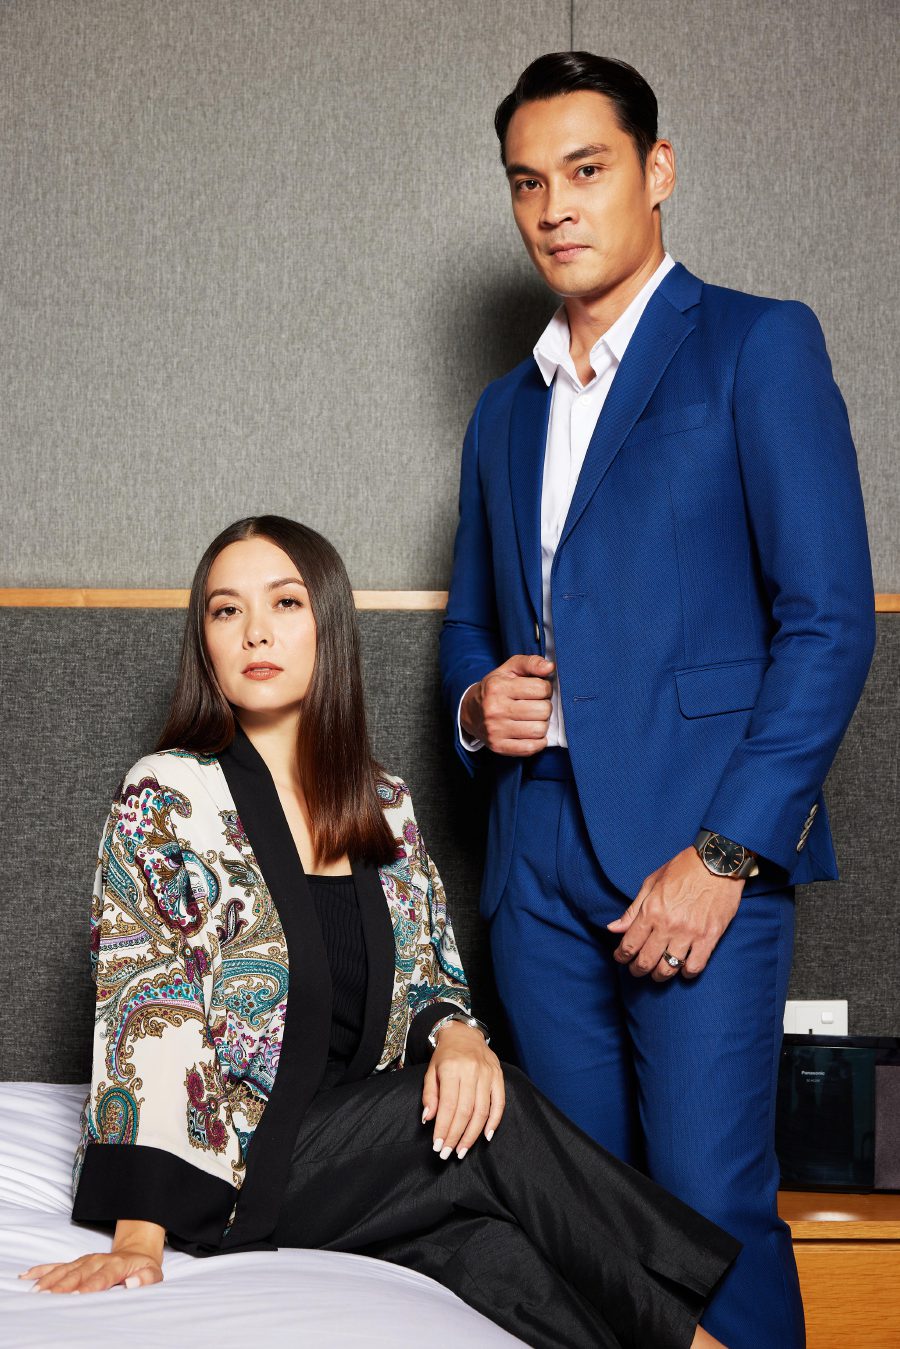 Siti Saleha and Hisyam Hamid play the leading roles in Amazon Original’s ‘That Cover Girl.’ Photo courtesy of Prime Video